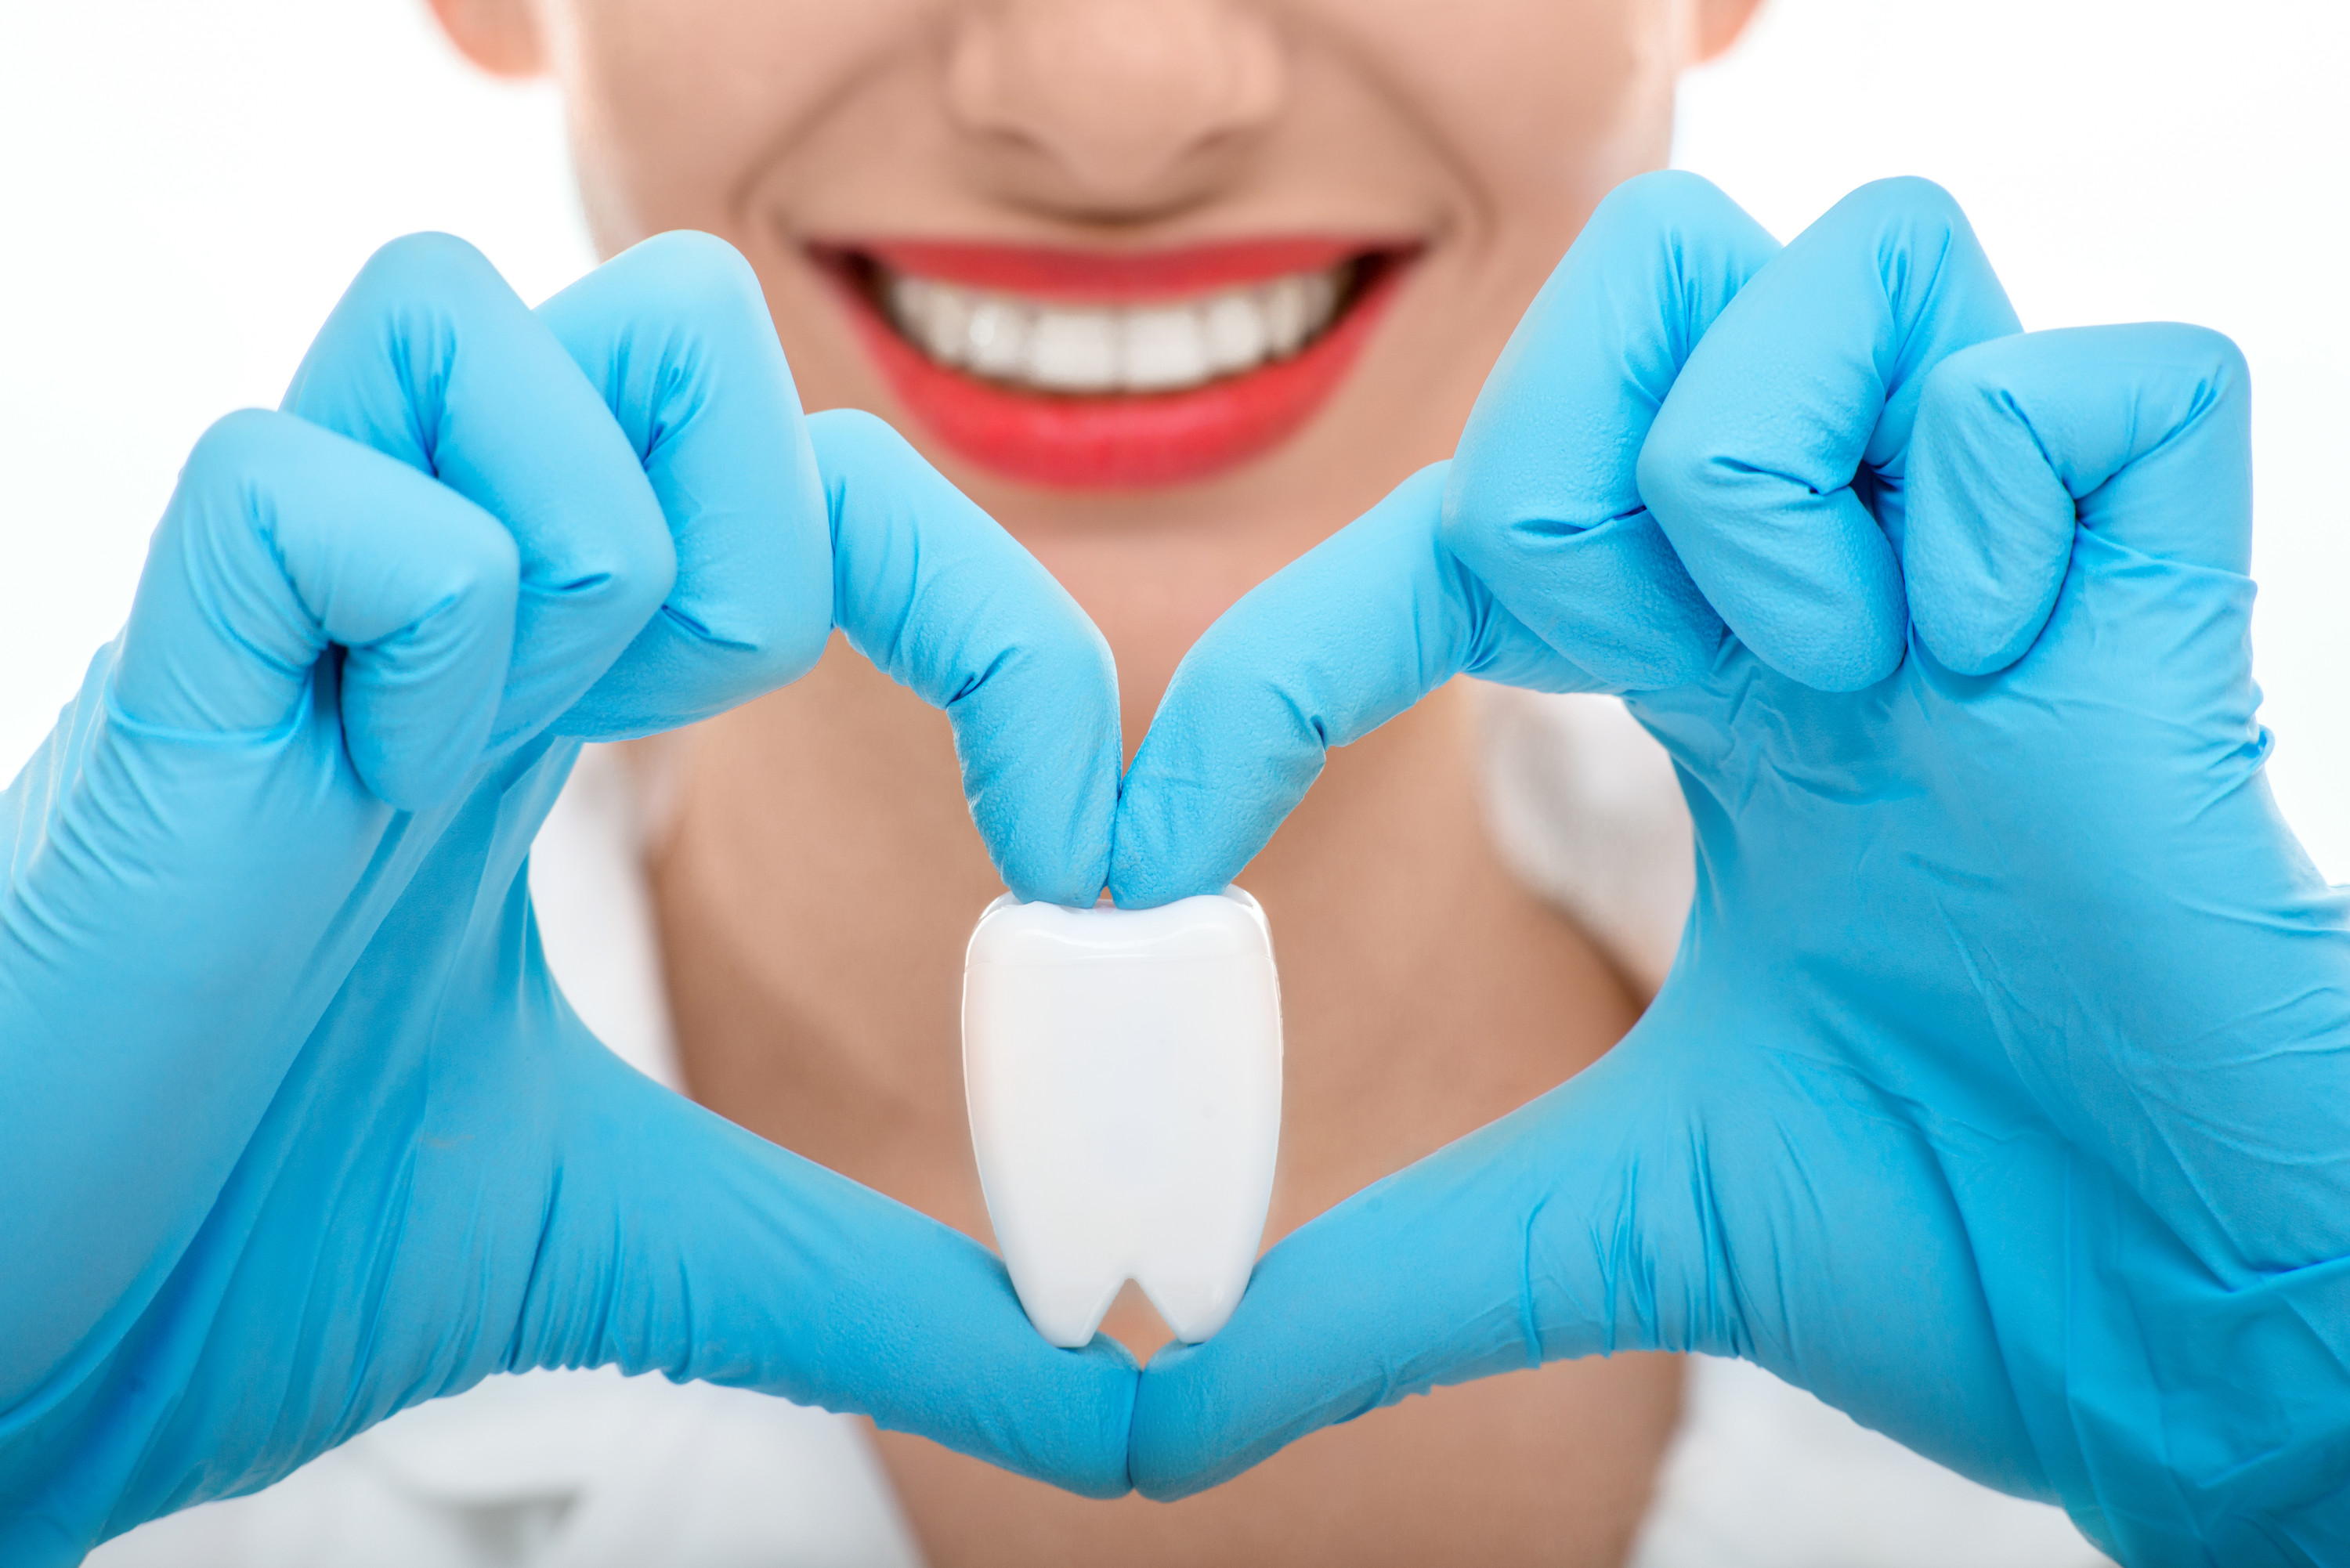 impacts of dental hygiene on overall health